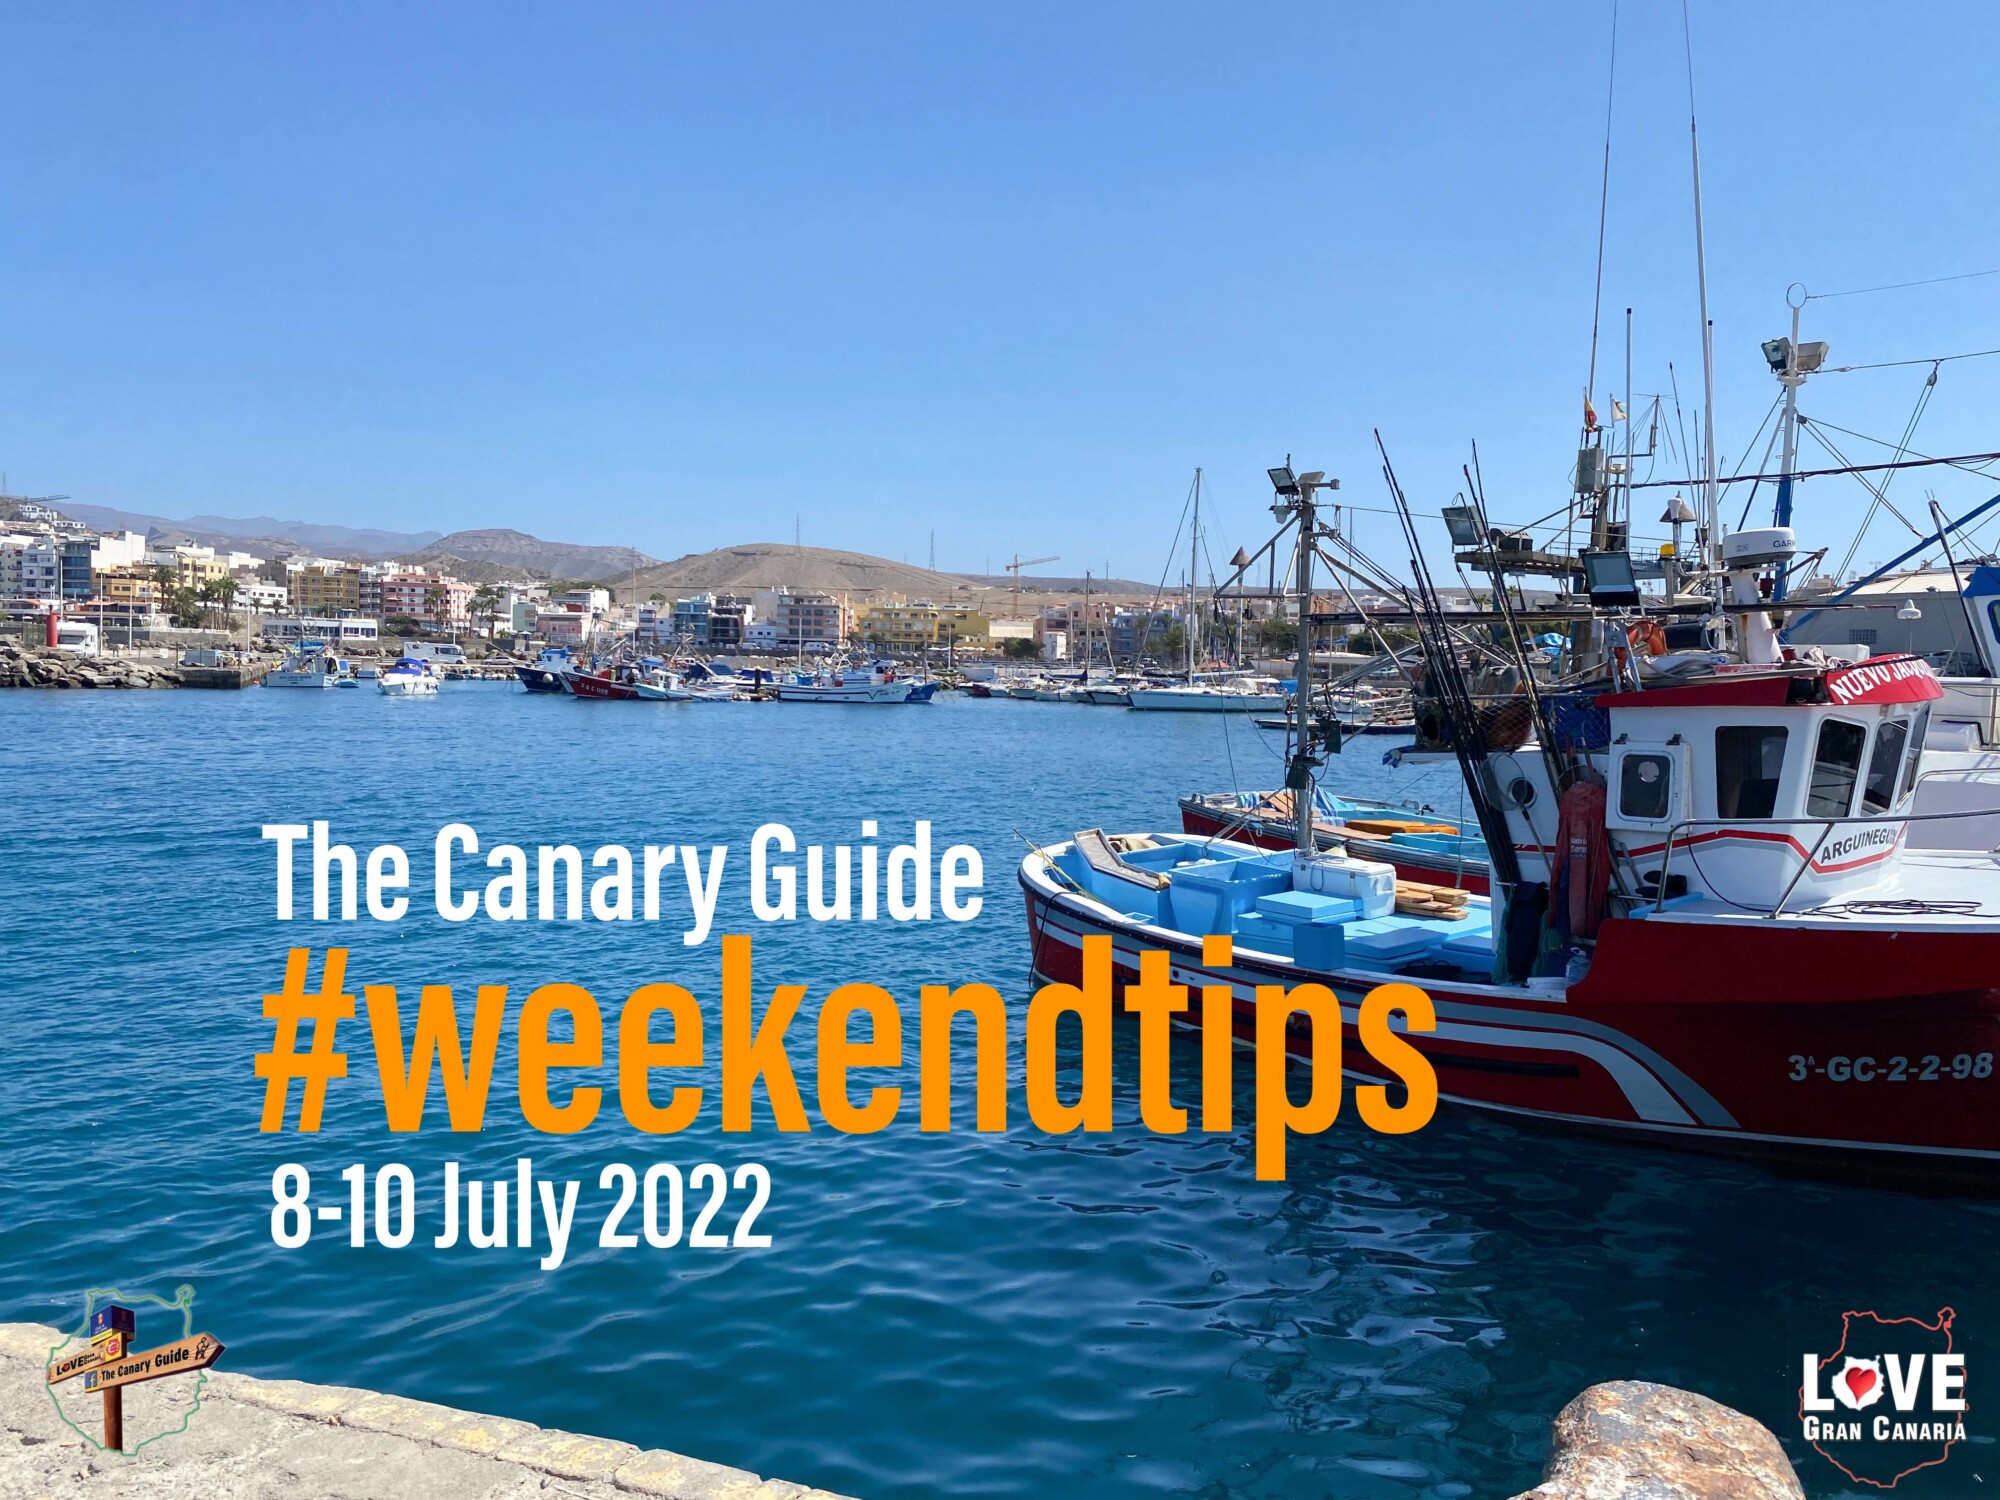 The Canary Guide #WeekendTips 8-10 July 2022